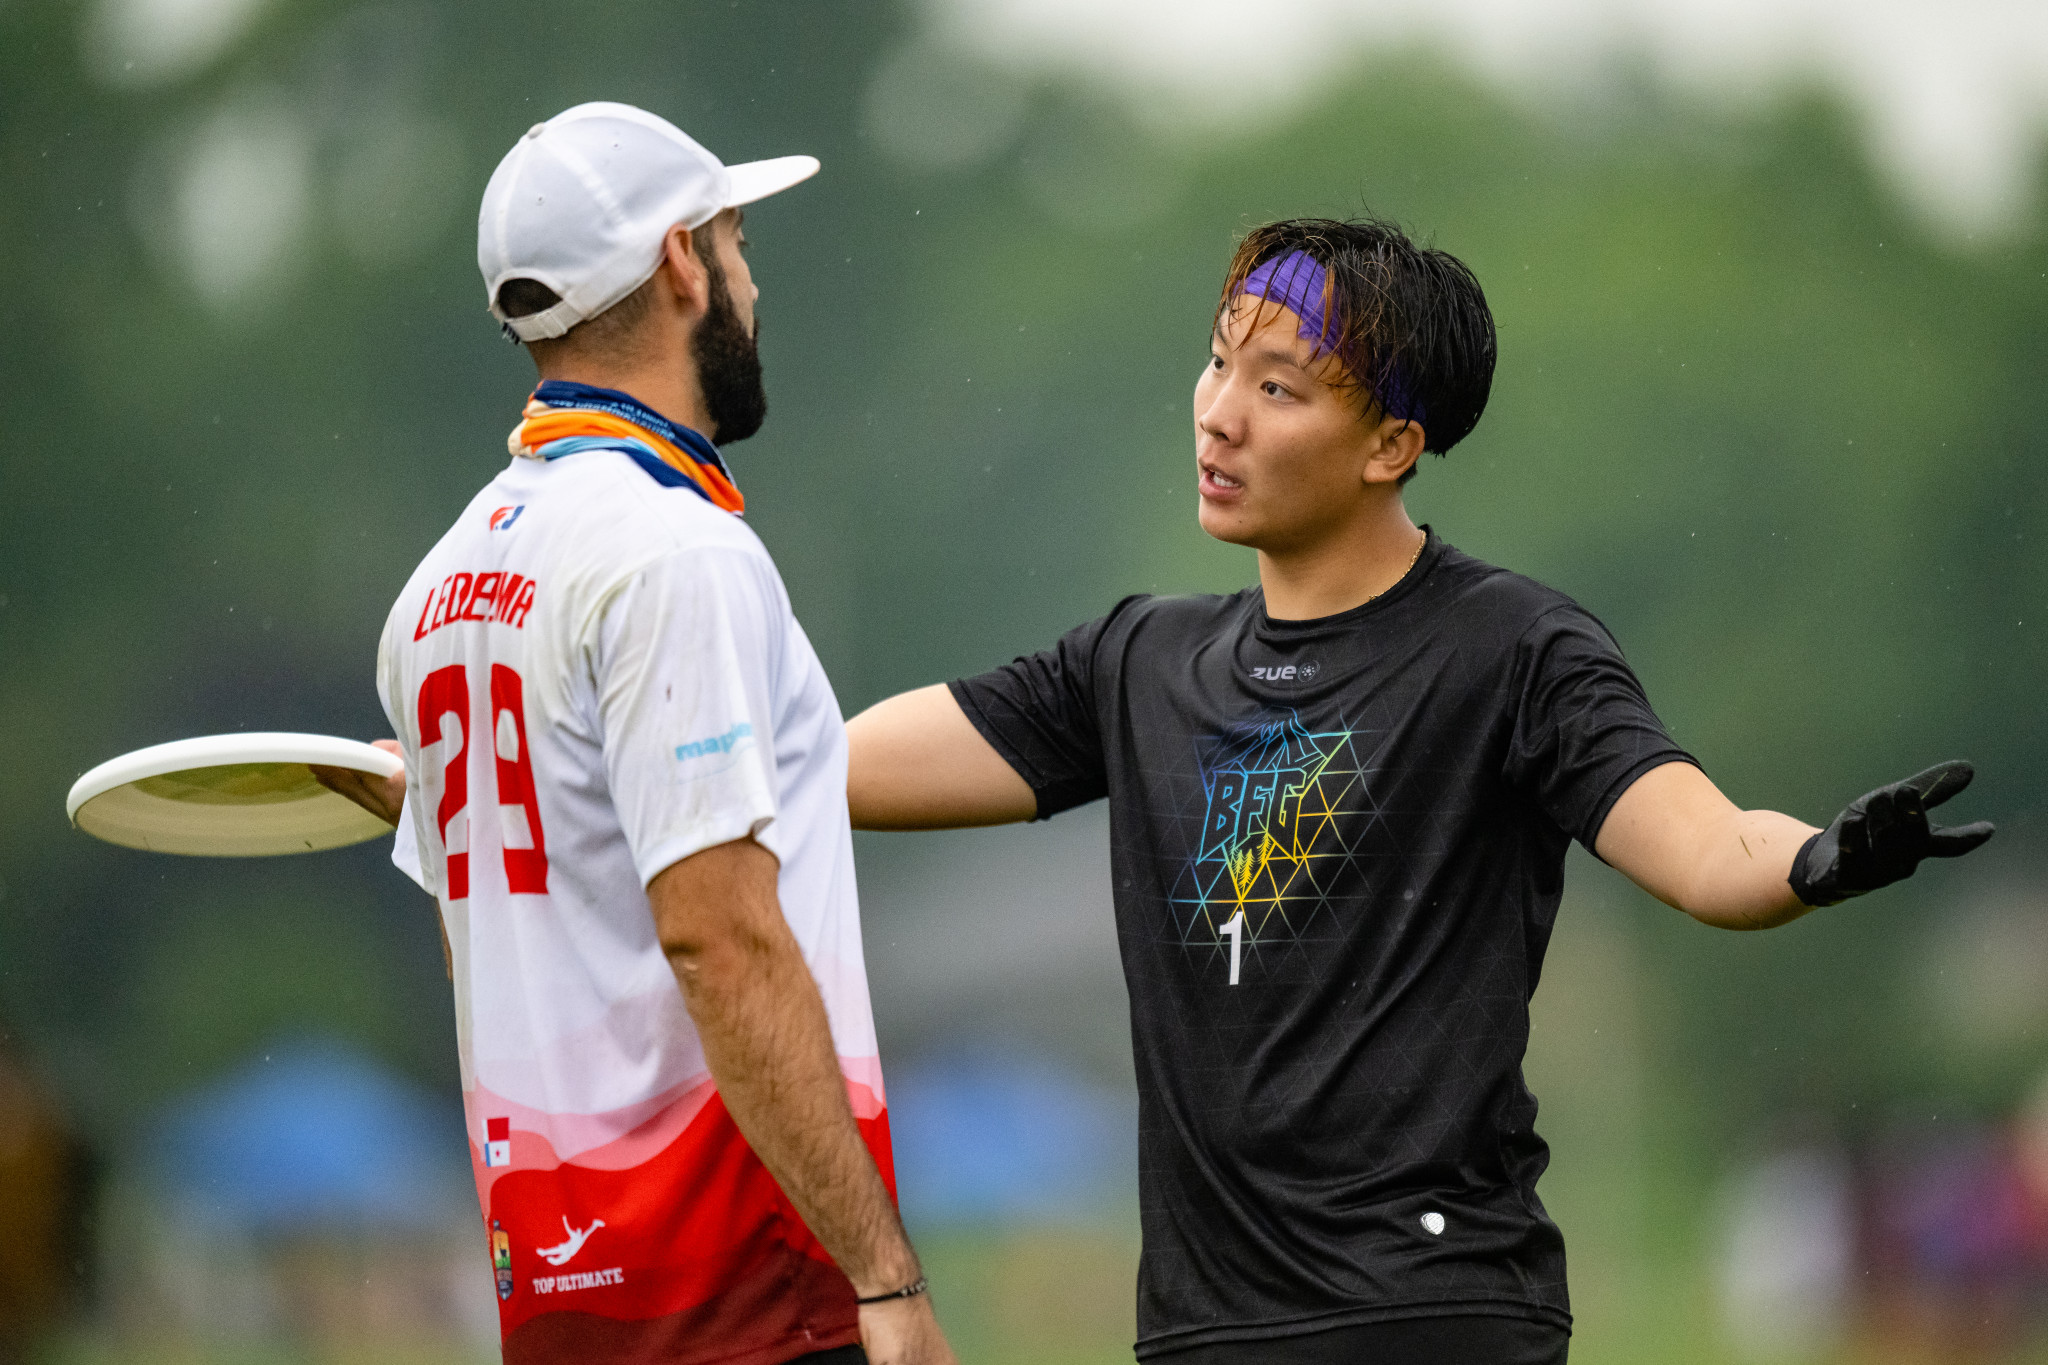 BFG's Martin Le, right, disagreed with a strip call from Two Oceans' Jose Daniel Gamez Llaurado, left ©Samuel Hotaling for UltiPhotos